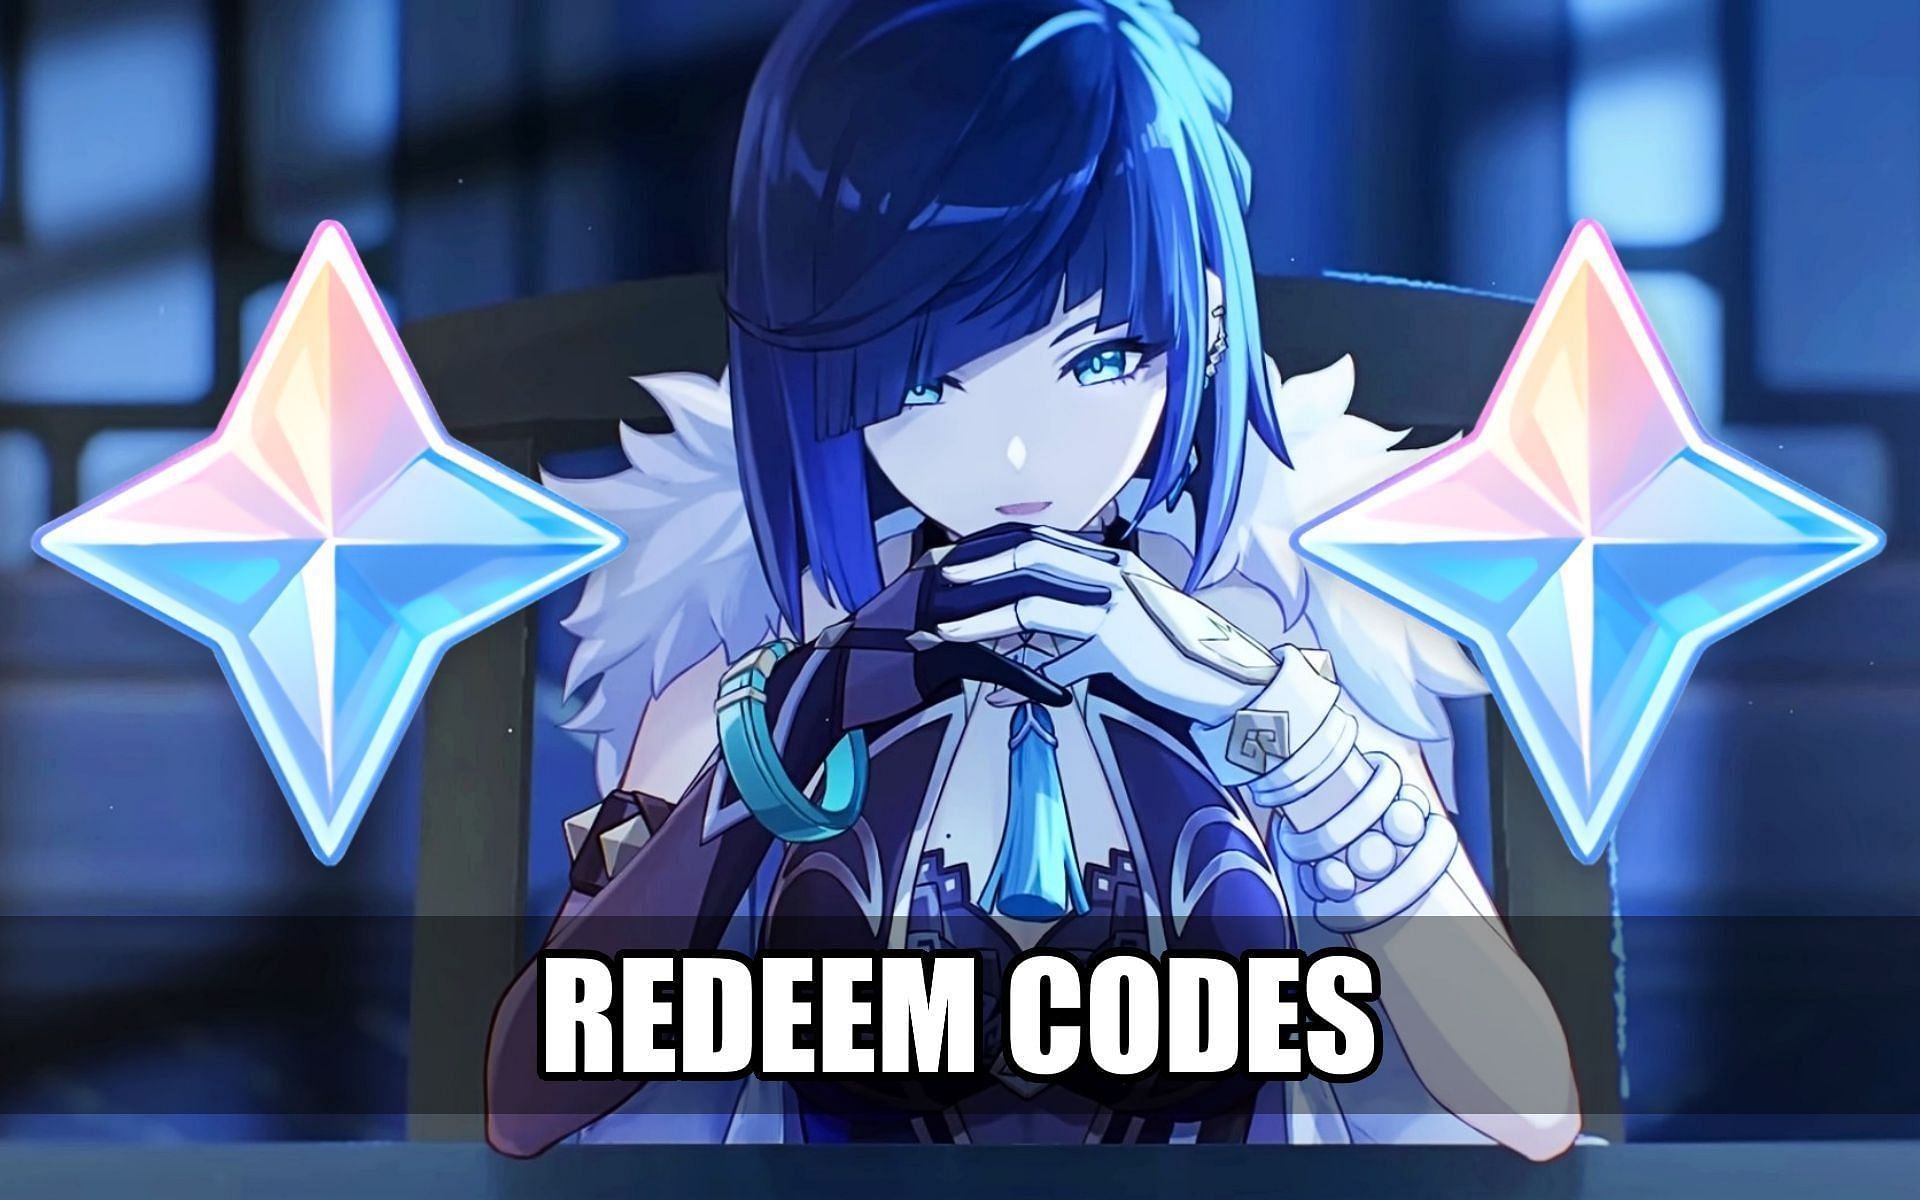 Players can get redemption codes from the Genshin Impact 3.1 Special Program (Image via HoYoverse)